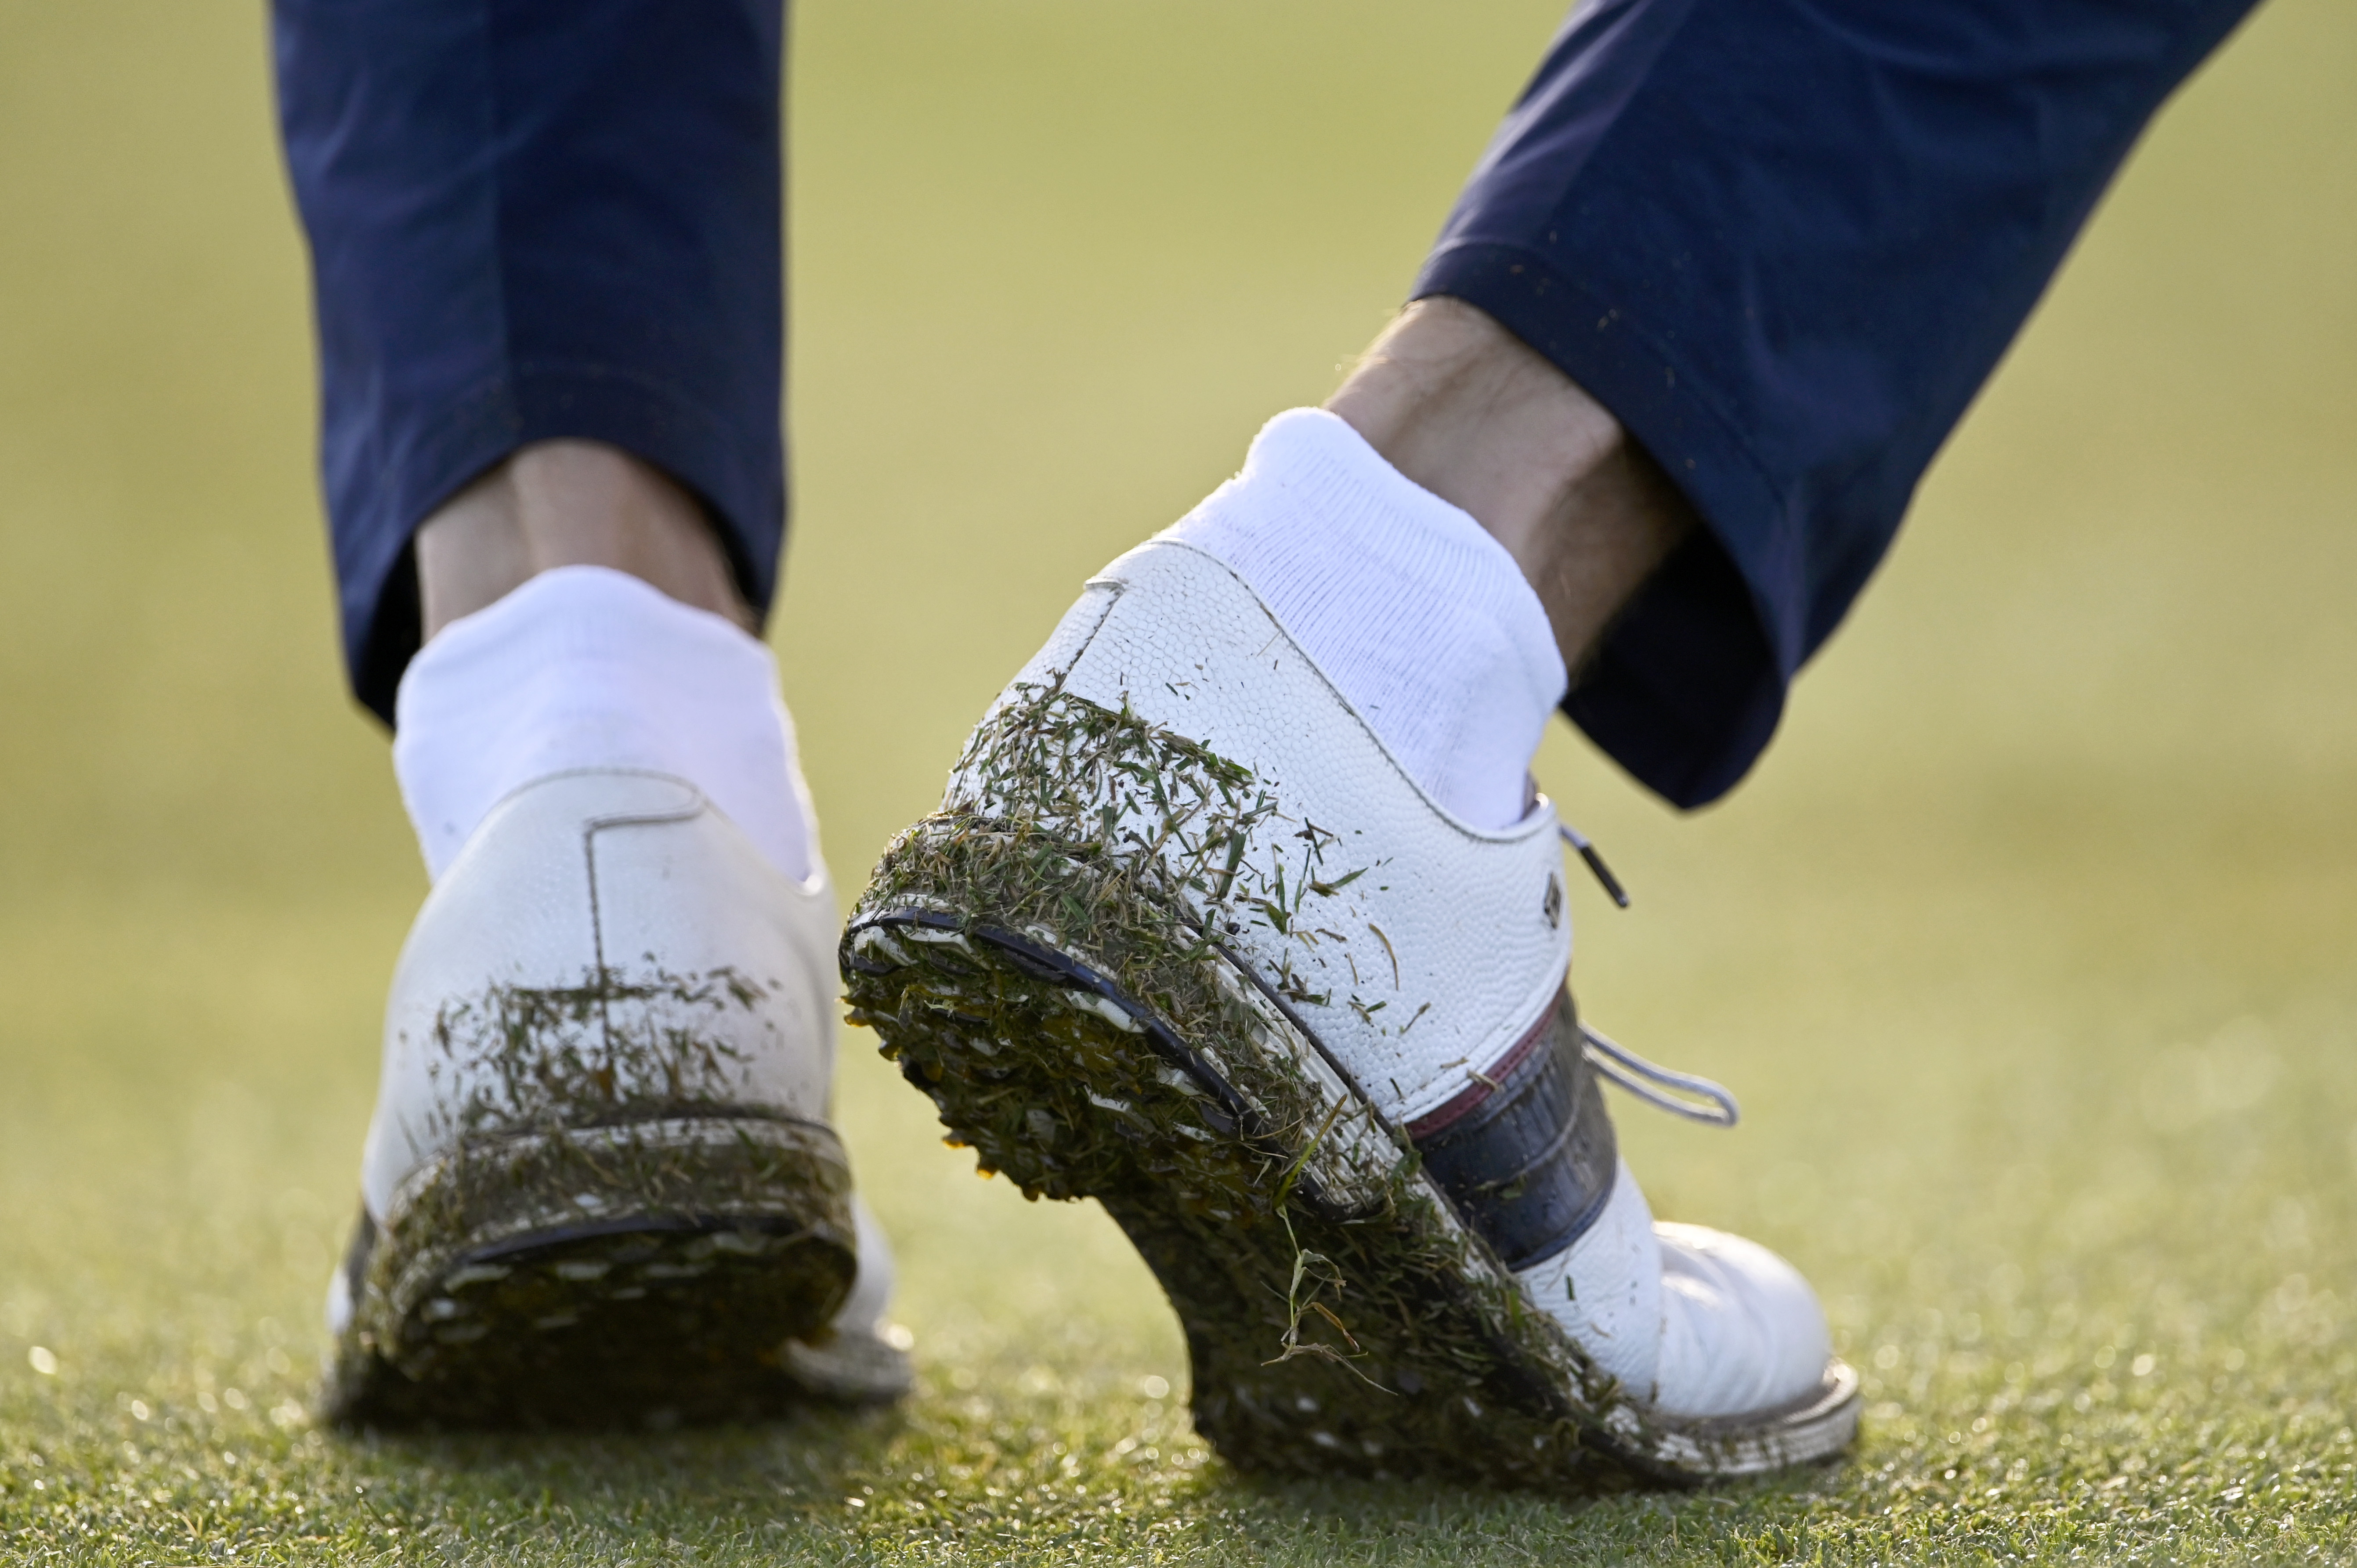 Wet golf shoes covered in blades of grass